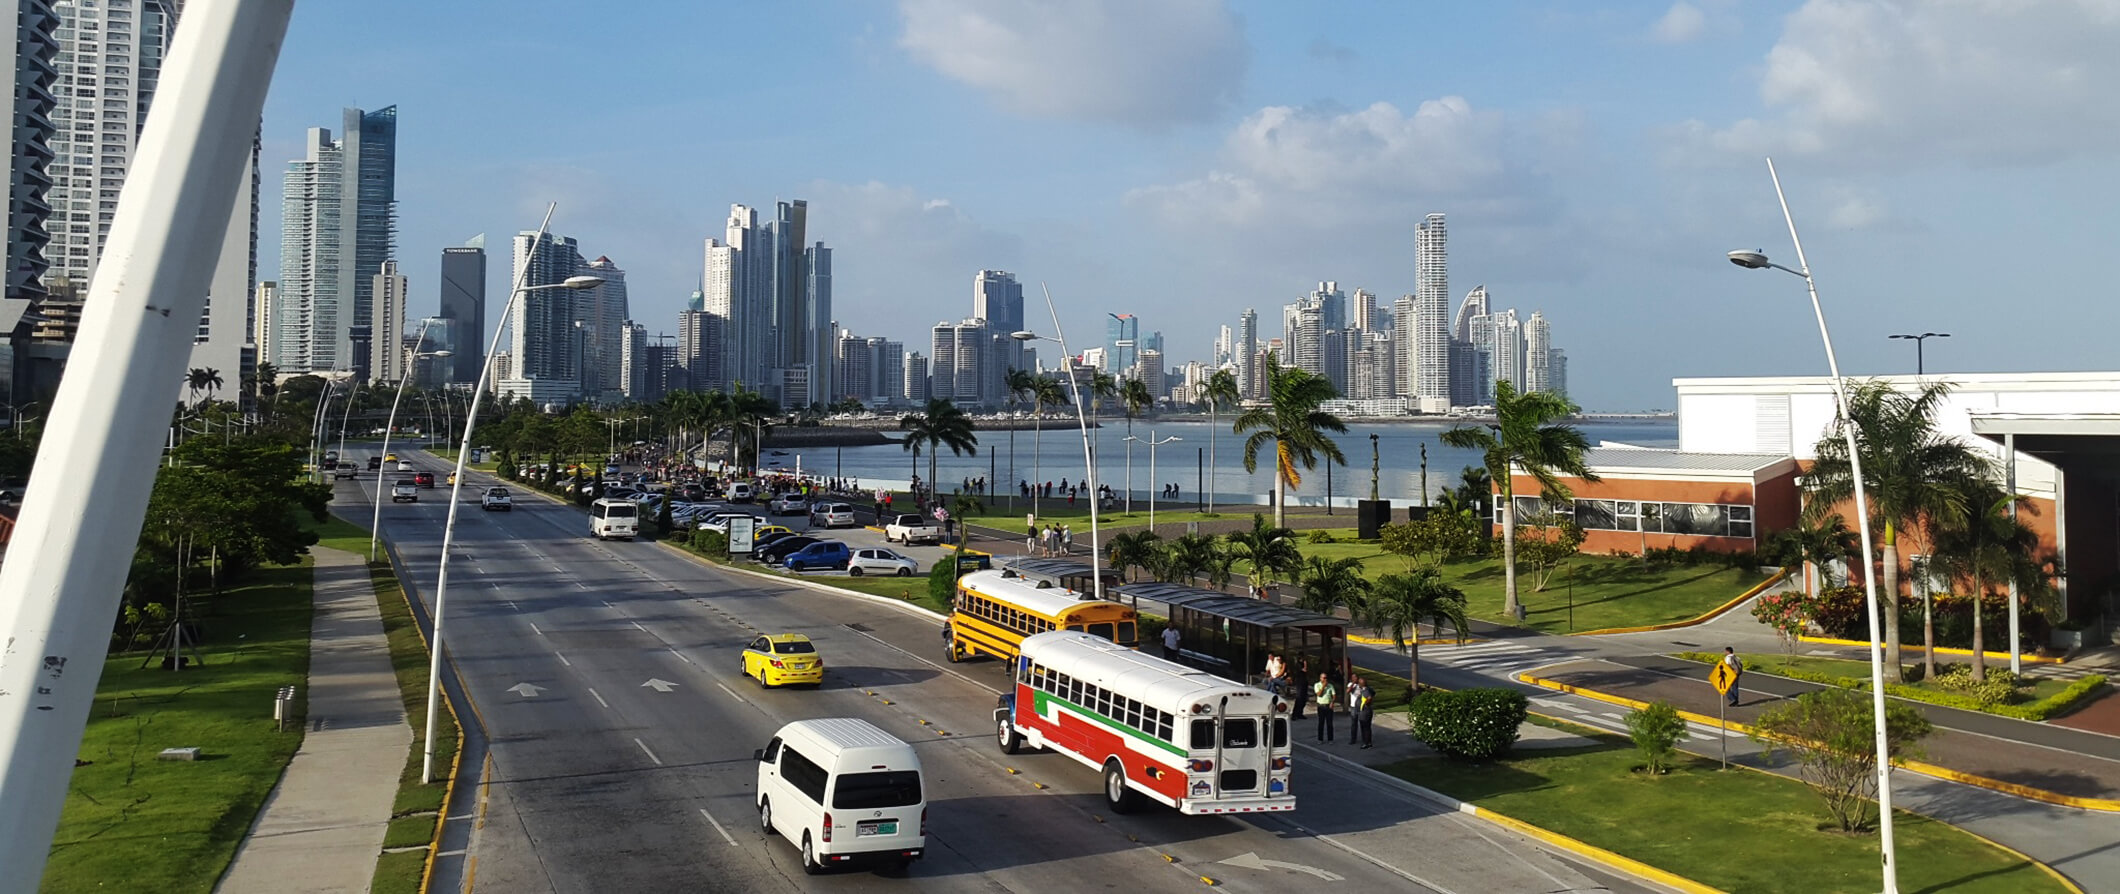 highway in Panama city. Cars and busses on the road with tall buildings to the rear.